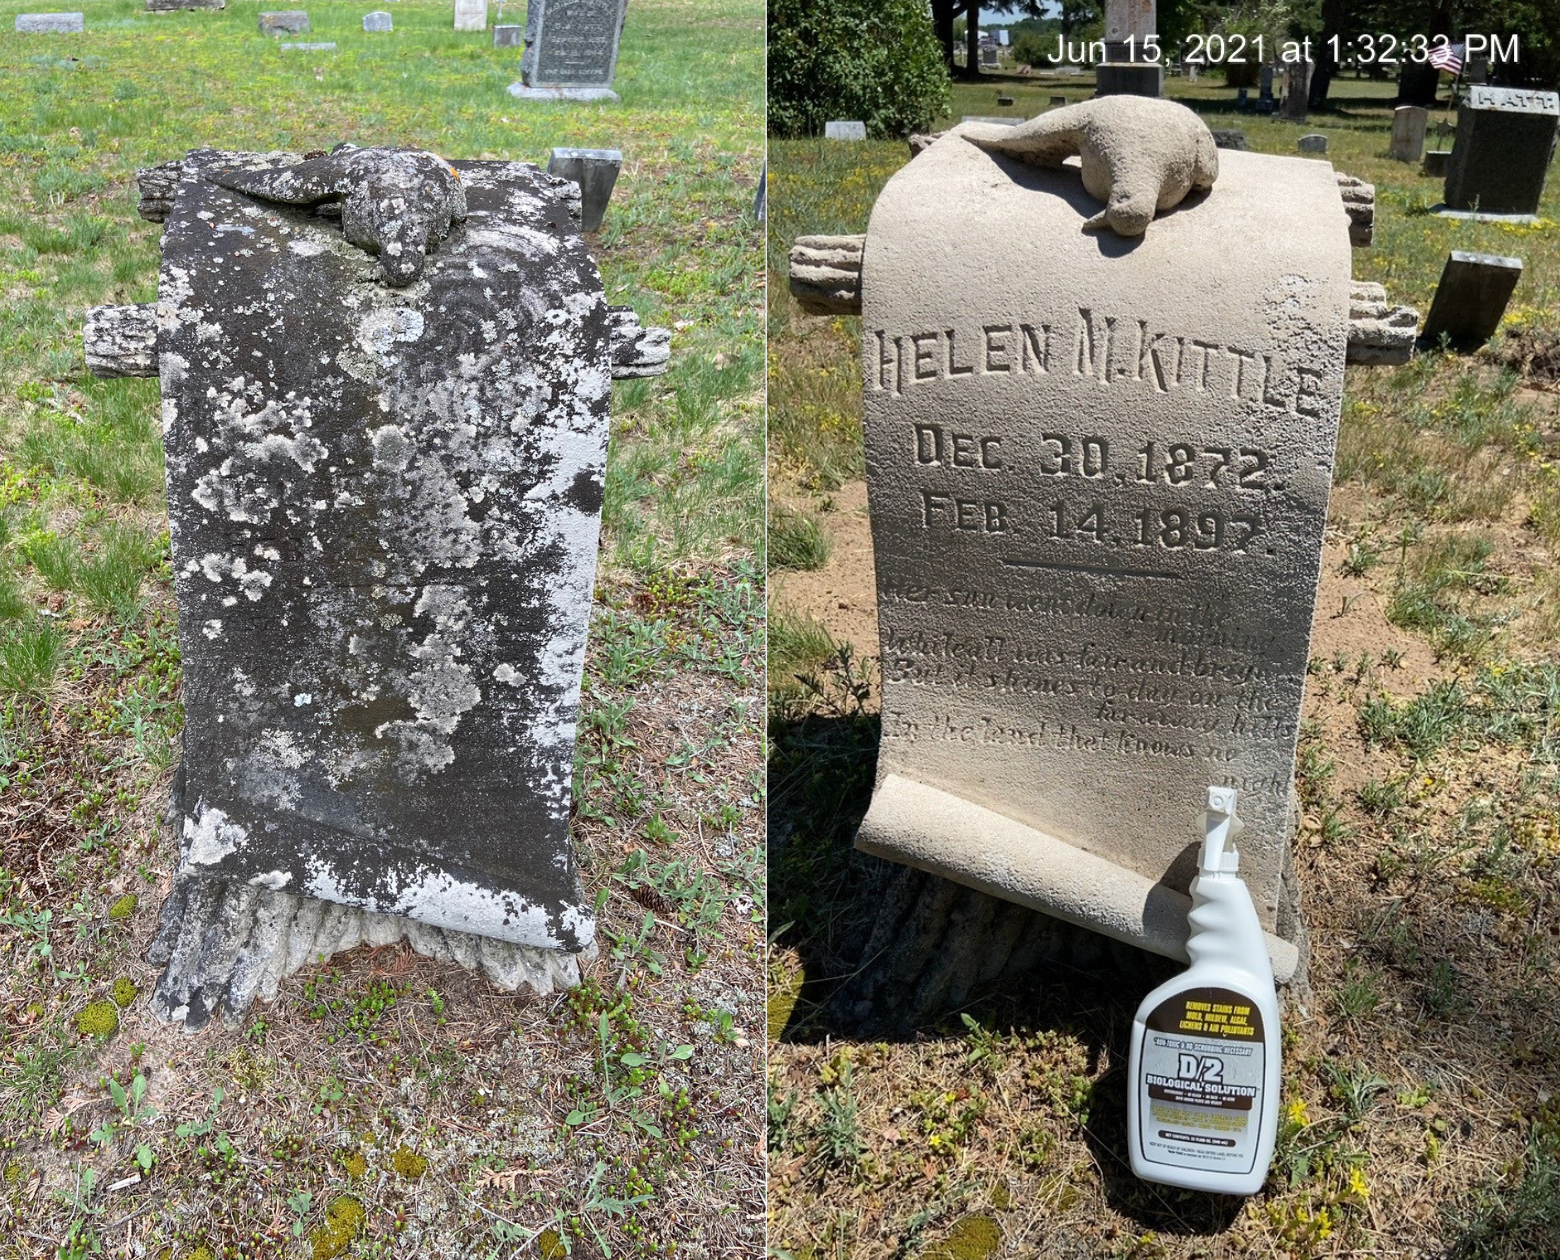 How to Clean a Gravestone with D/2 Biological Solution